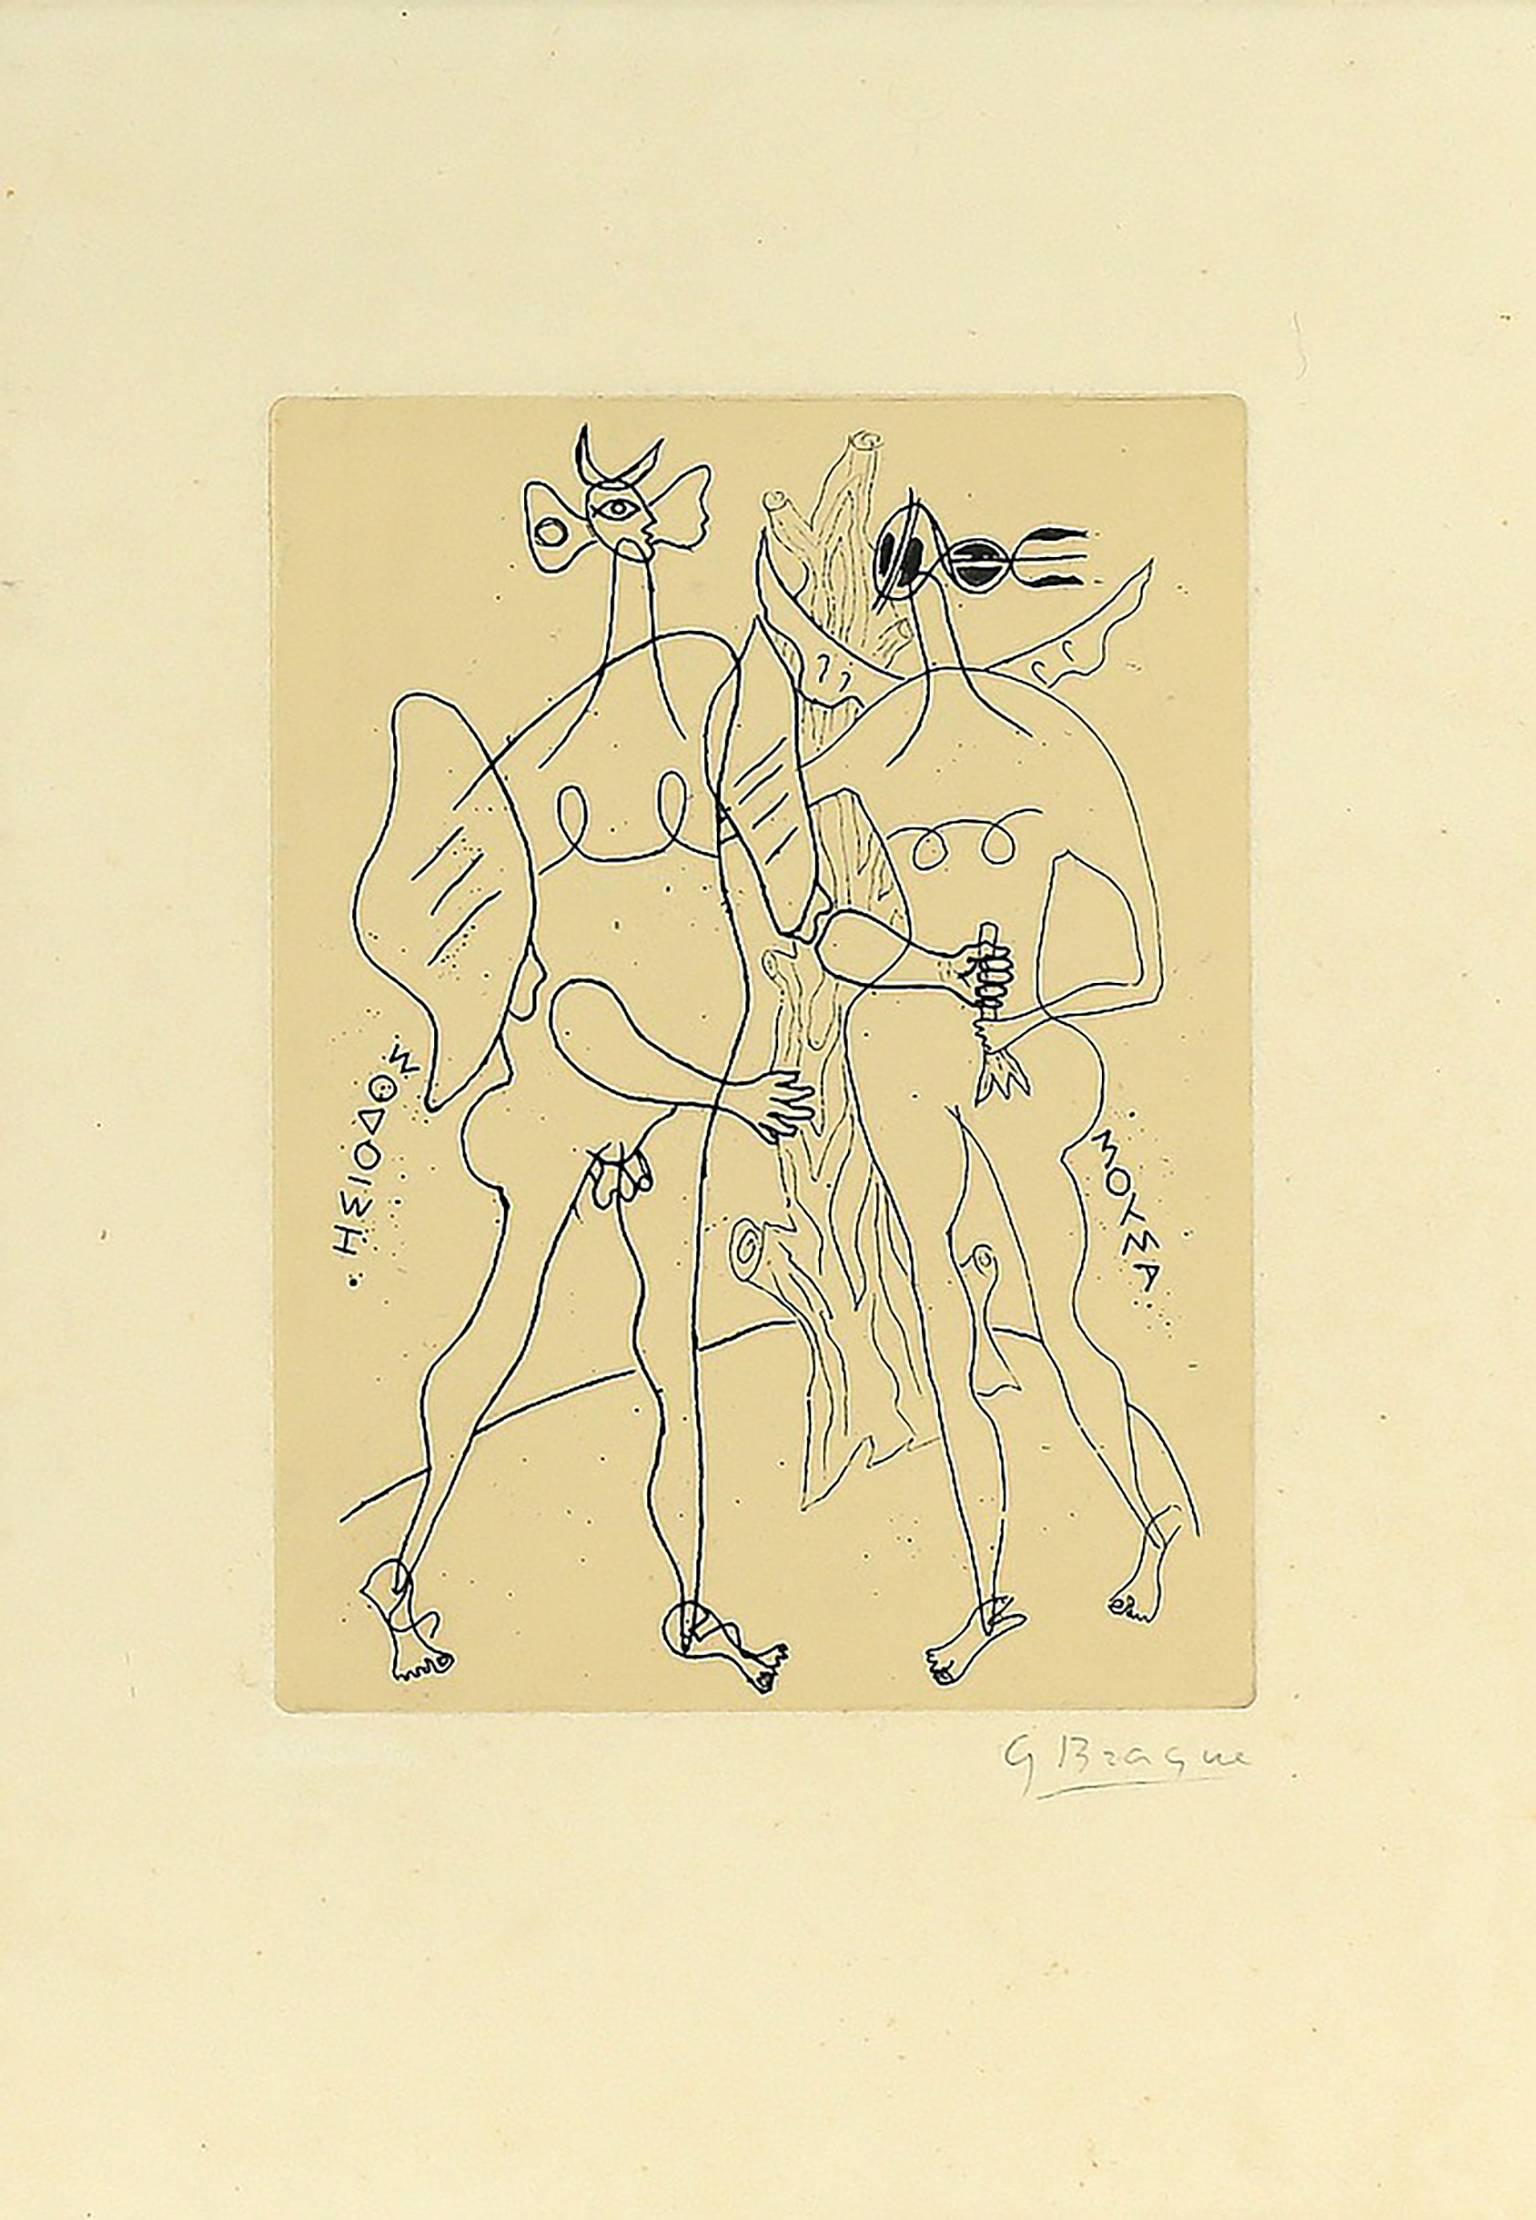 Original Georges Braque (France, 1882 – 1963) etching entitled “Hesiode Theogonie” which is translated “A Plate from the Album”  The print has a full margin and is pencil signed by the artist Braque in the lower right corner  Framed under glass 